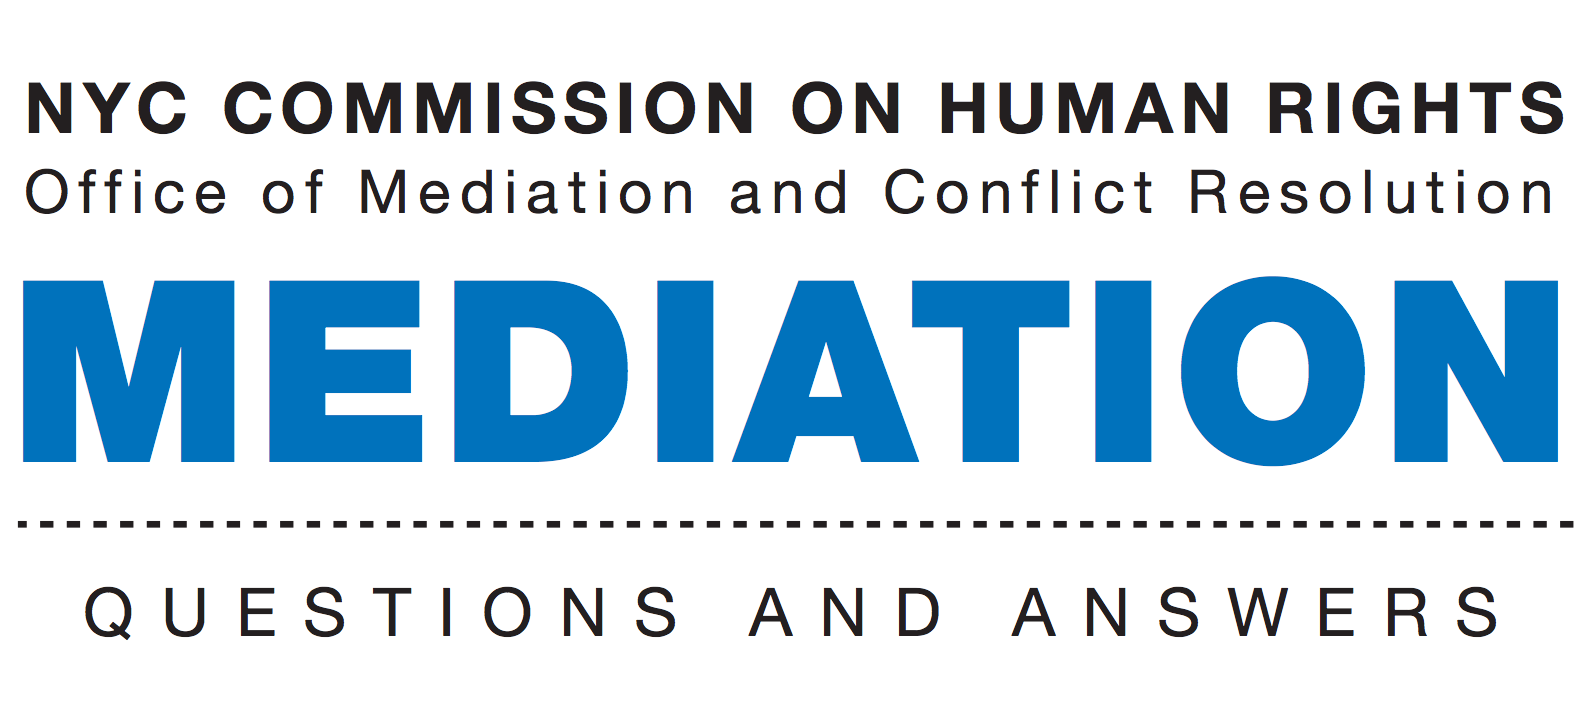 Text image: "NYC Commission on Human Rights Office of Mediation and Conflict Resolution:  Mediation Questions and Answers"